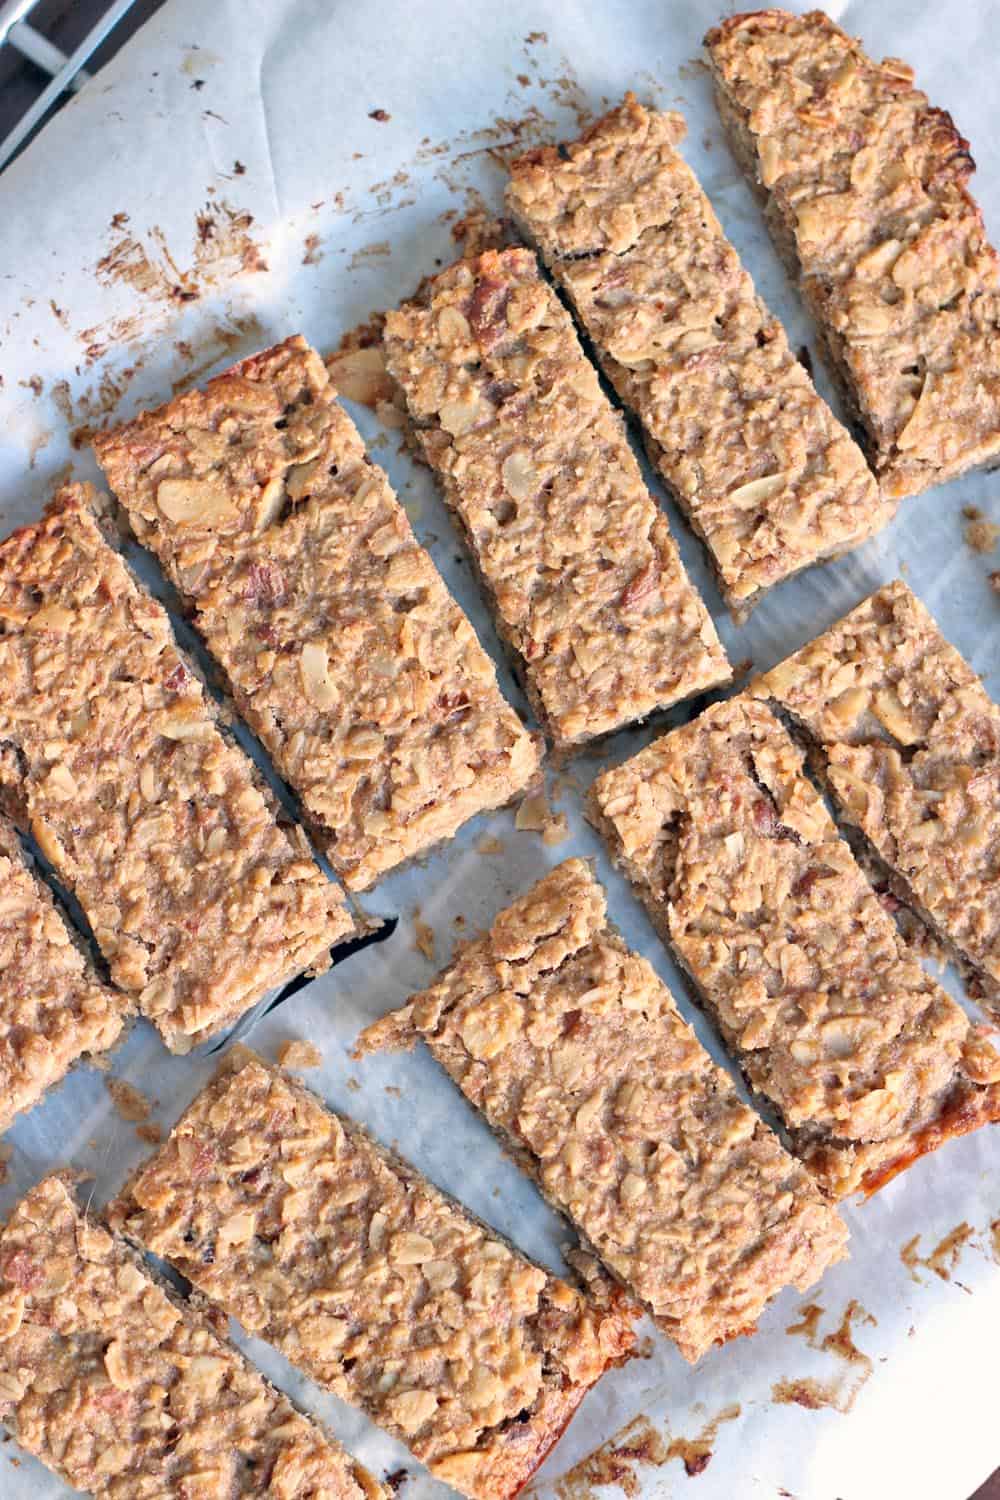 Overhead view of sliced peanut butter and banana energy bars.